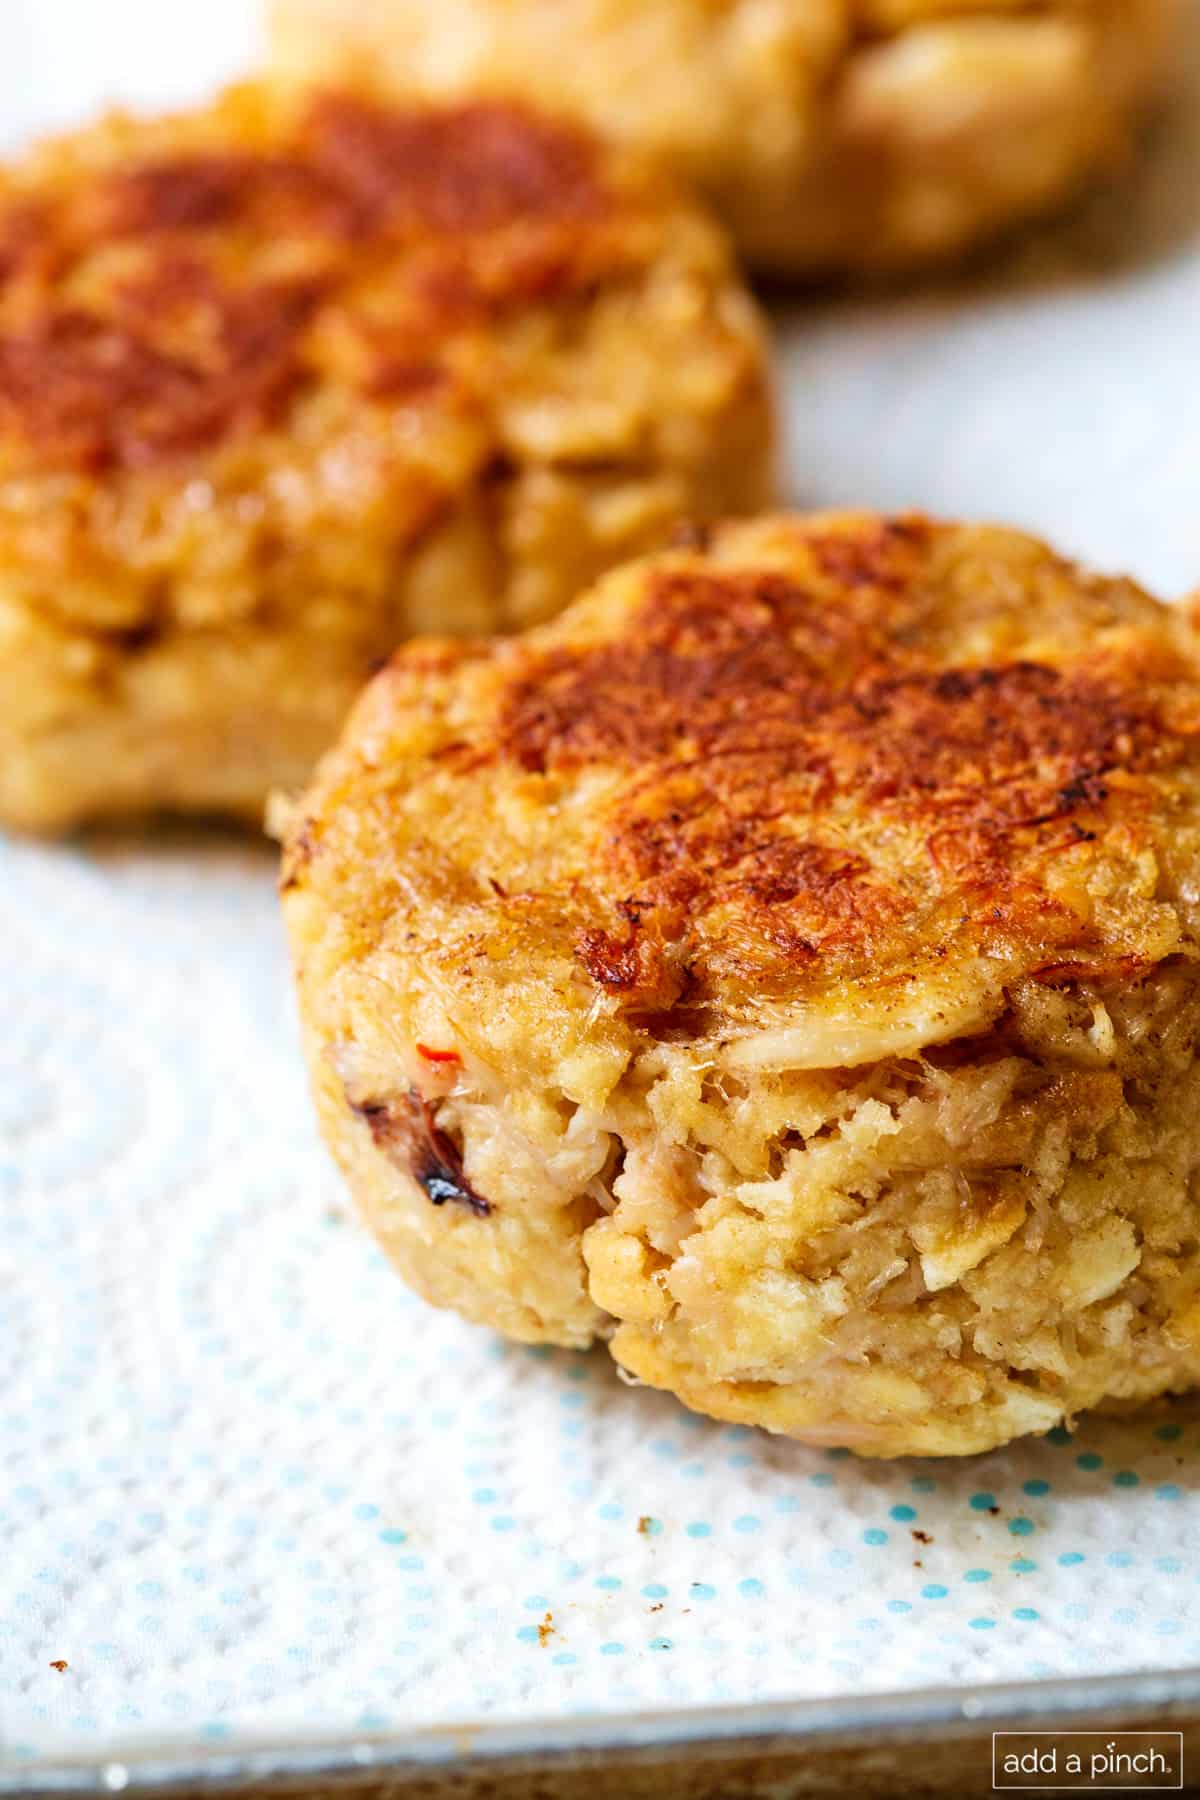 Paper towel holds some golden brown crab cakes to drain.